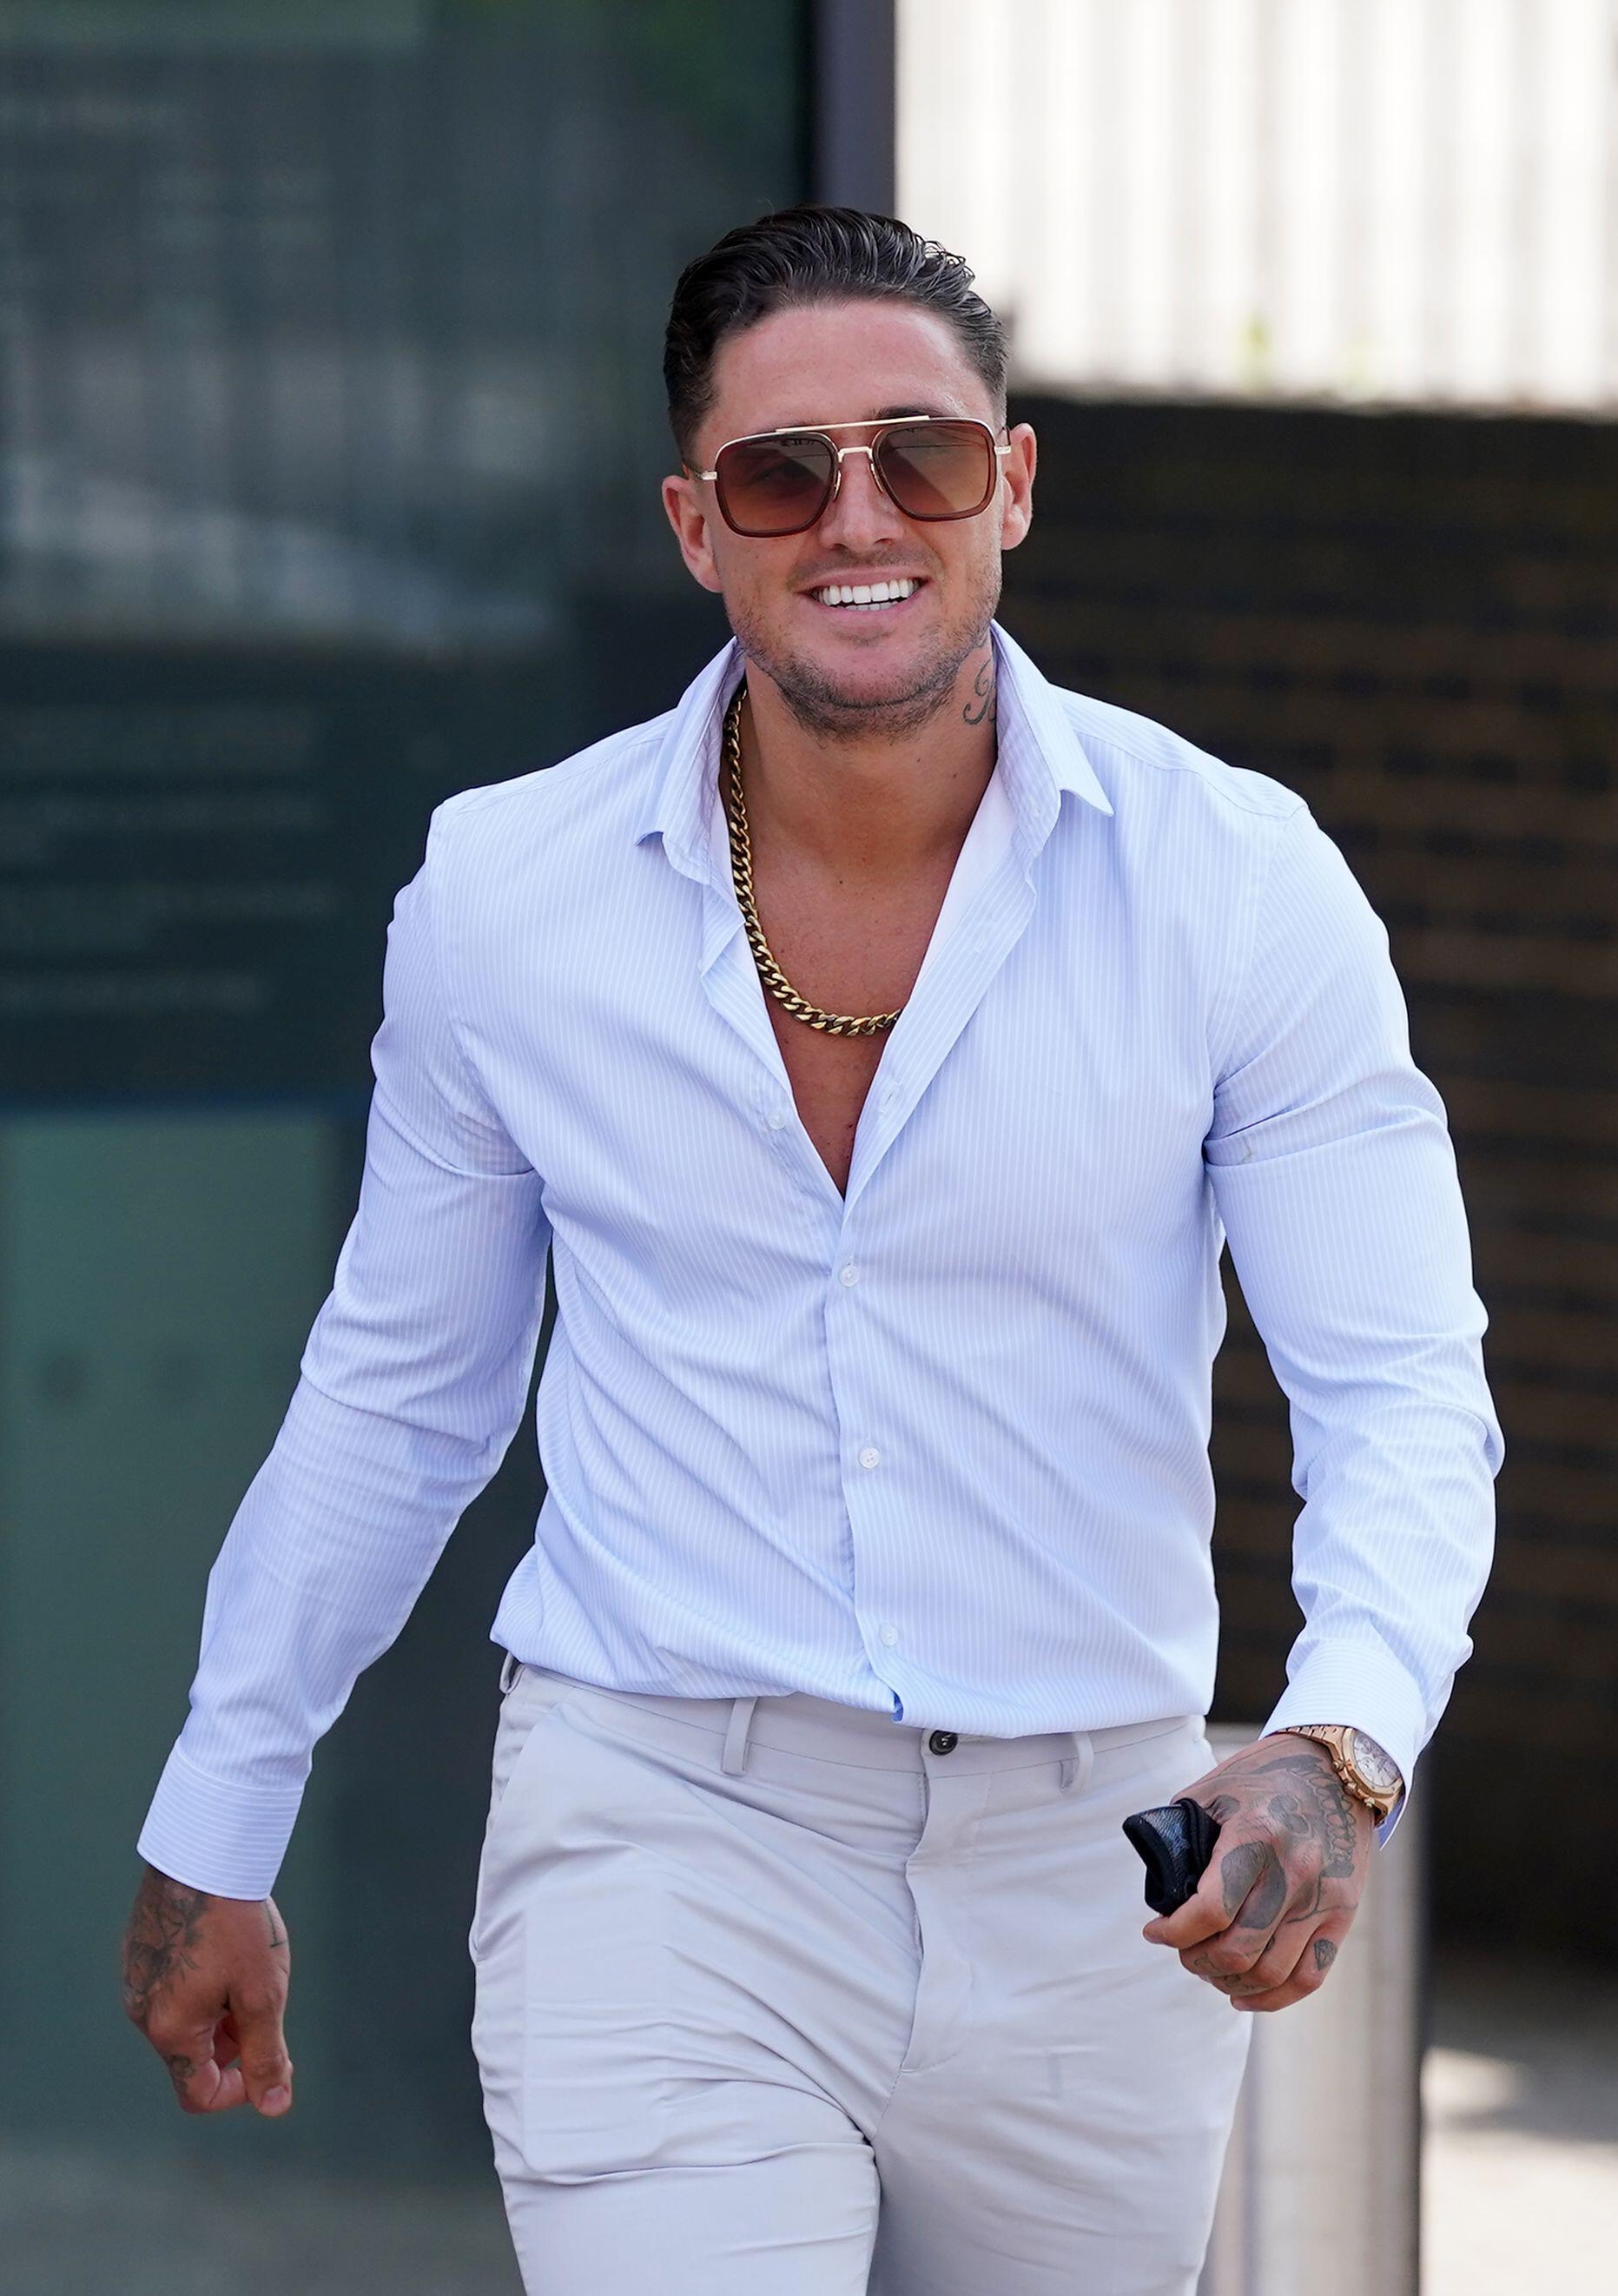 Stephen Bear Appears In Court After Being Arrested For Breaching Bail Conditions